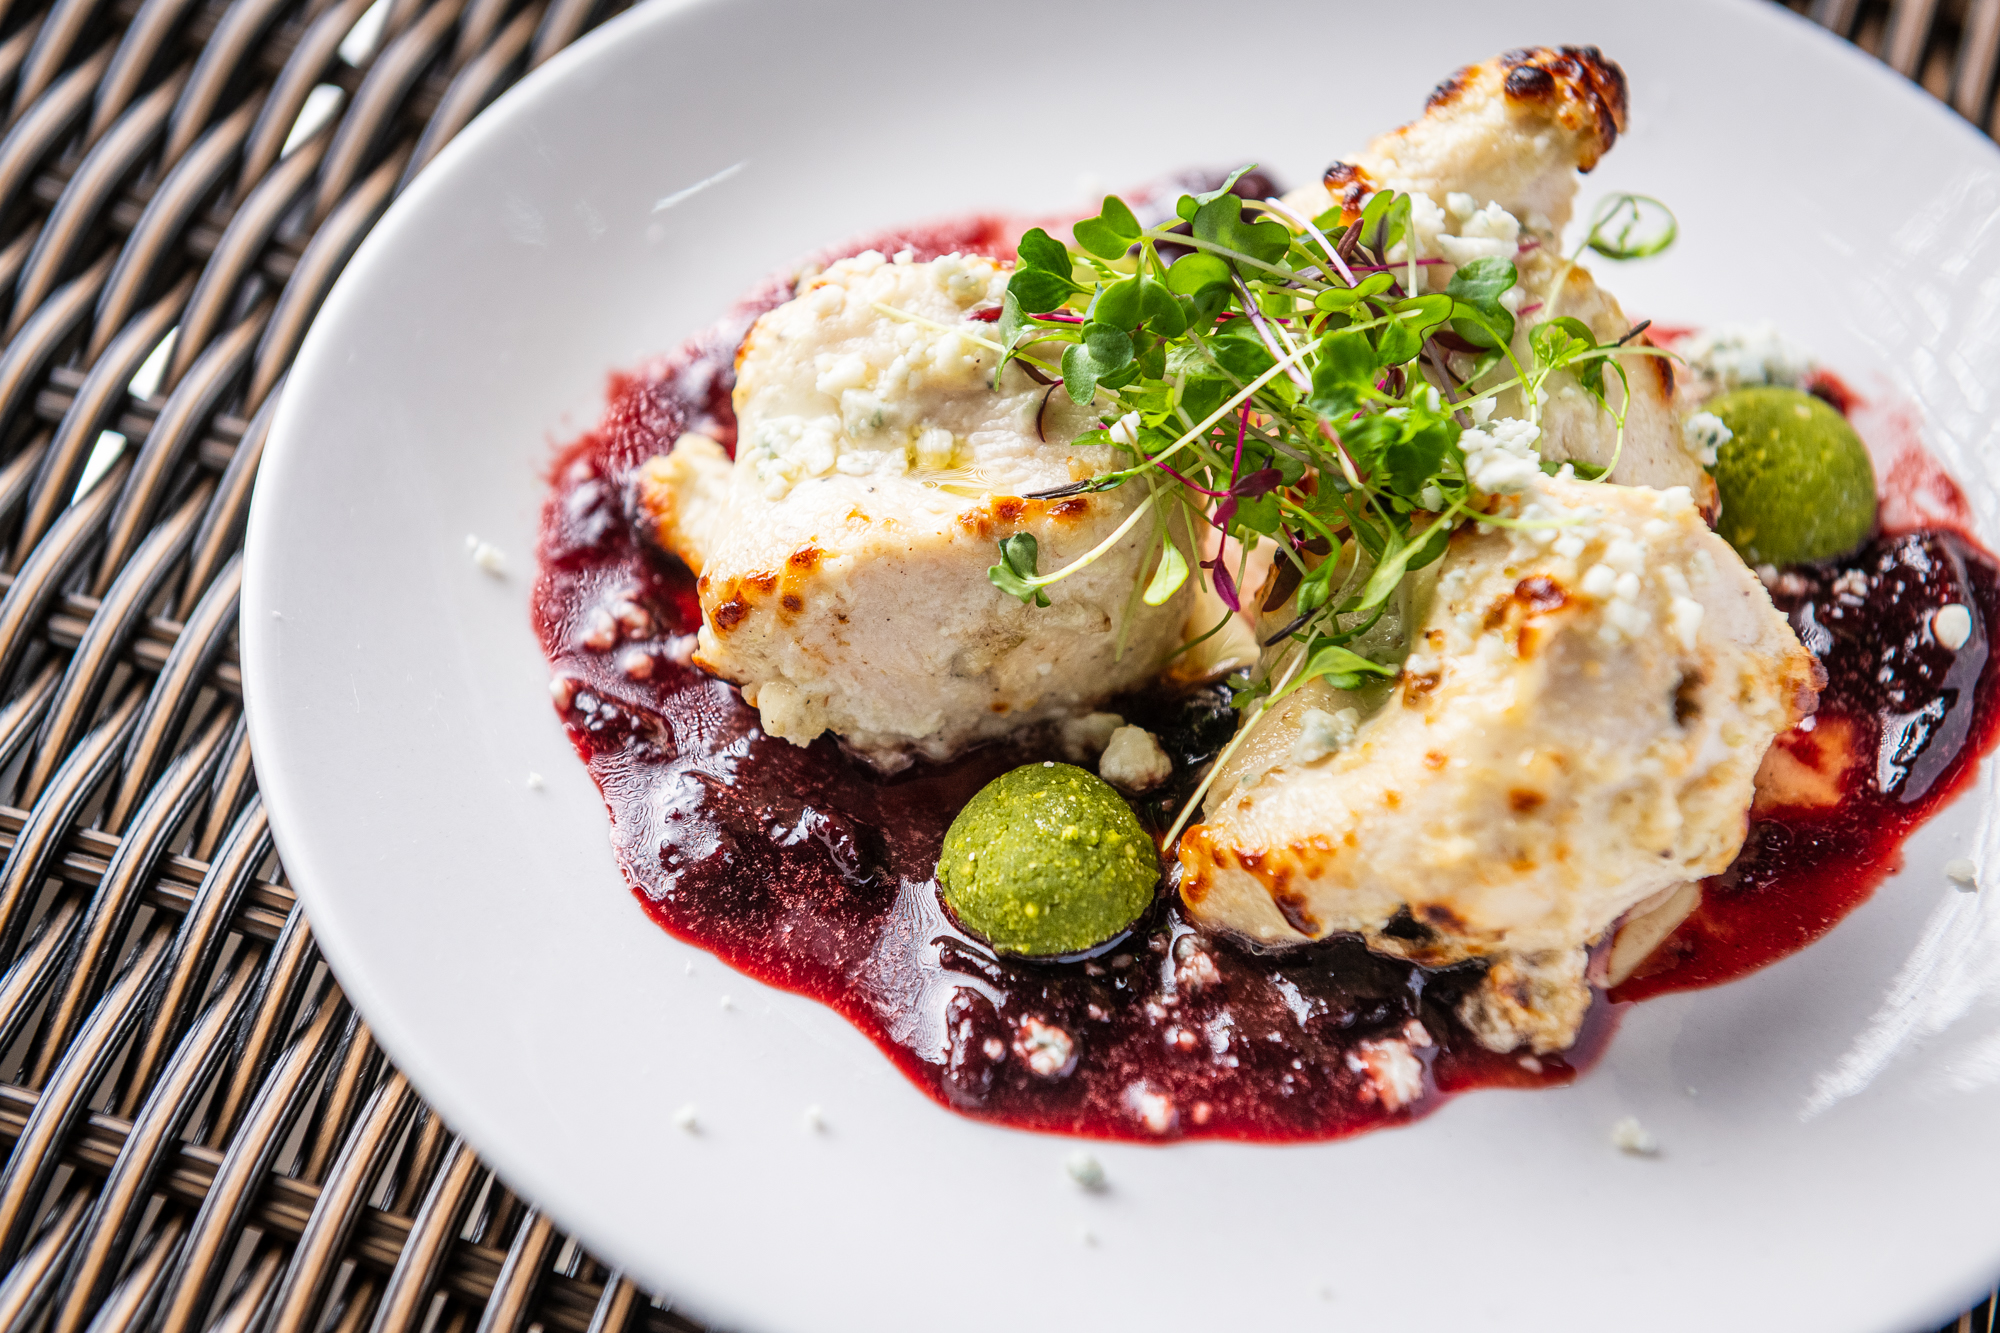 Pieces of chicken from Daru’s reshmi kebab are coated in a yogurt and blue cheese marinade while sitting above a deep red sour cherry sauce and chutney spheres.